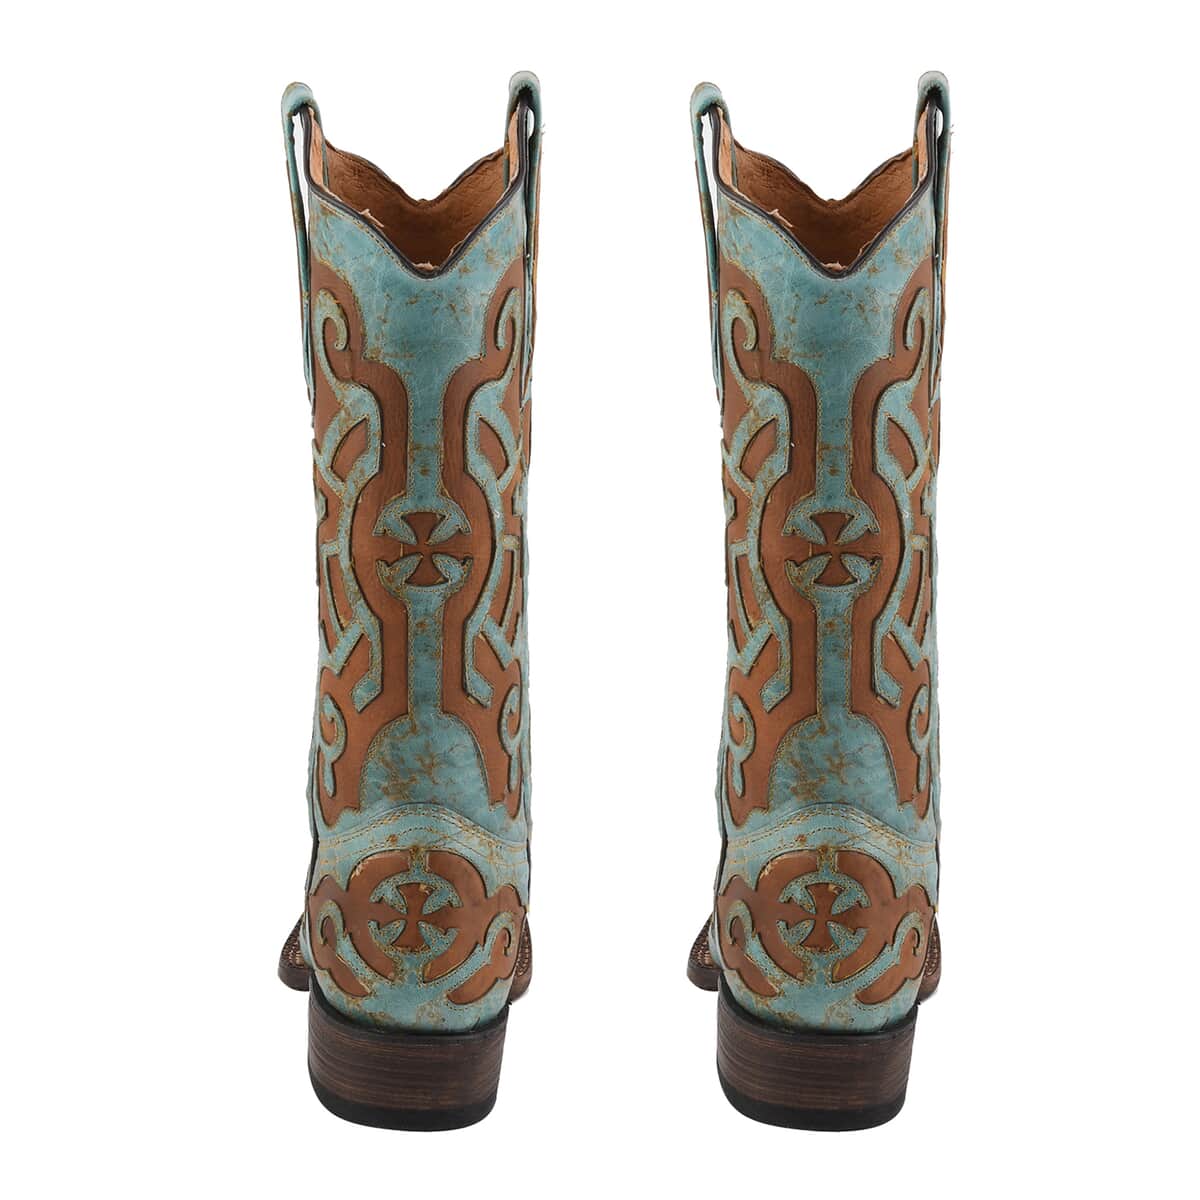 TANNER MARK 100% Genuine Leather Western Style Square Toe Boot with Glitter Lace Design - Turquoise/Cognac - Size 5.5 image number 3